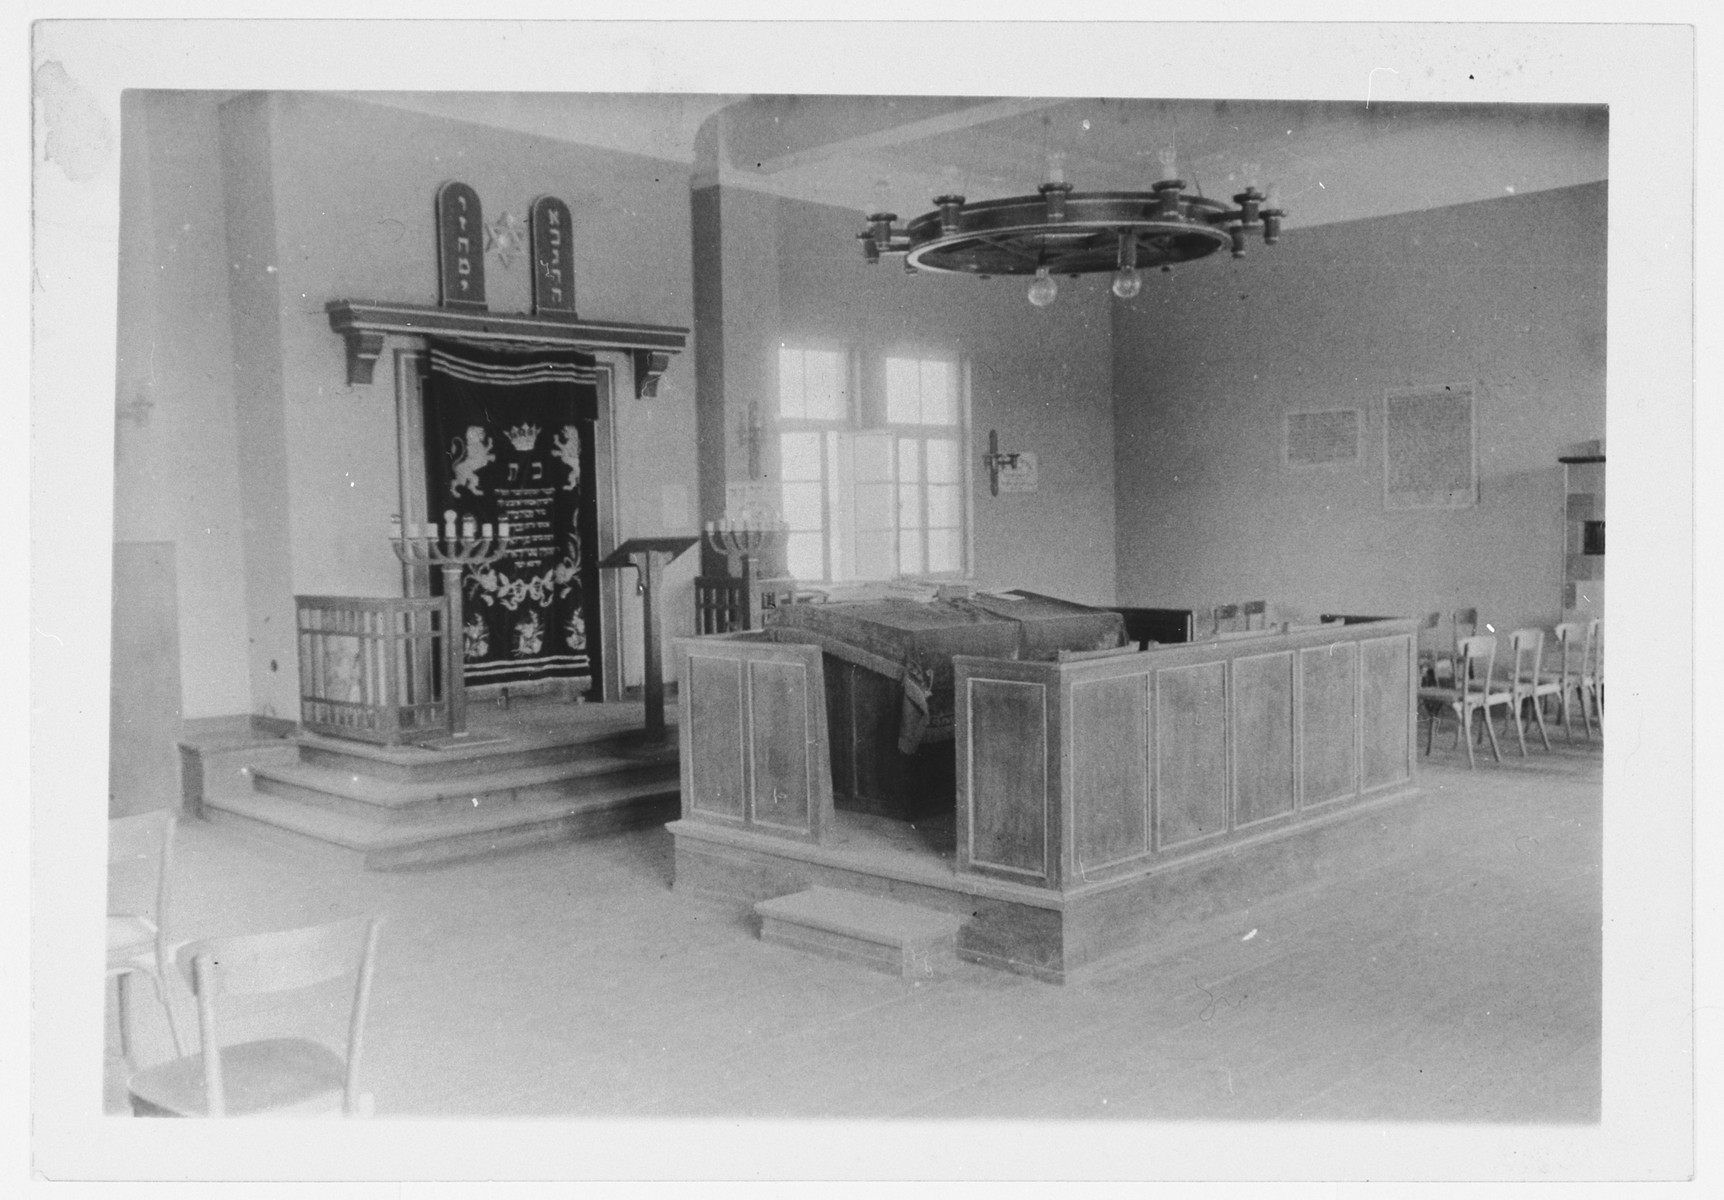 View of the interior of the synagogue in the Zeilsheim DP camp.